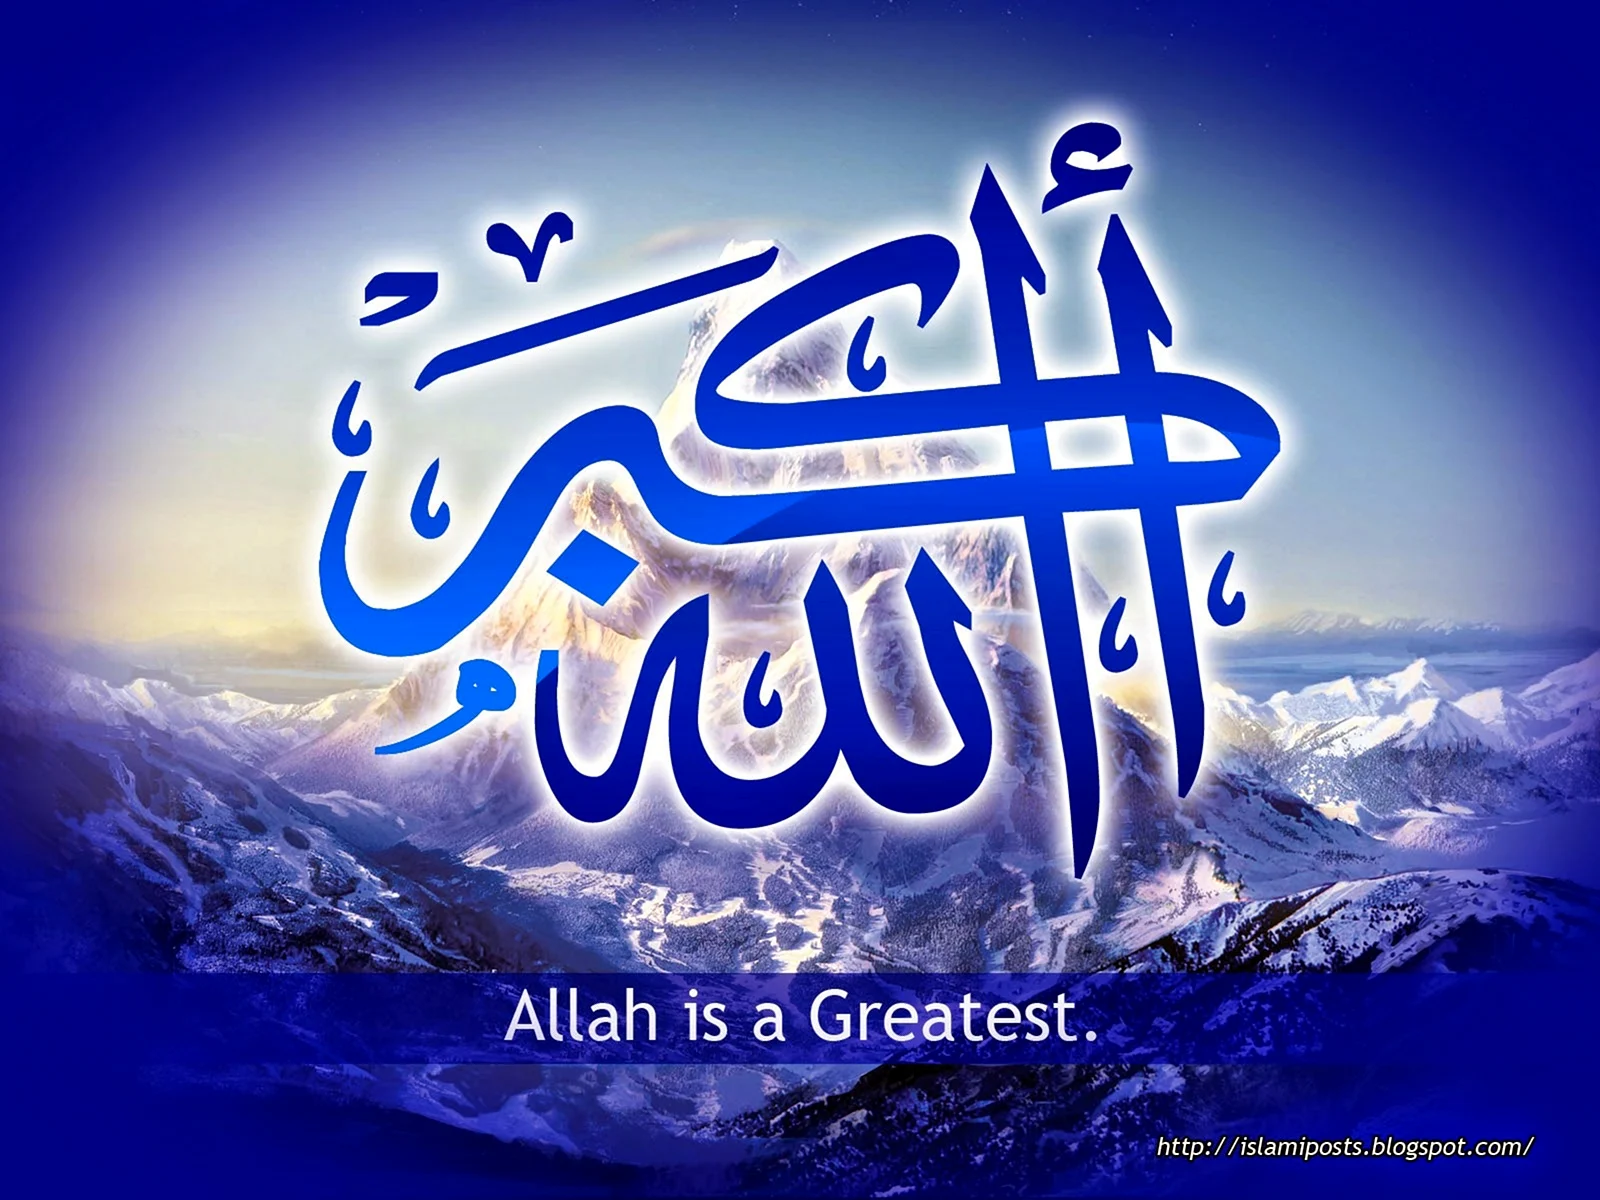 Allah is great